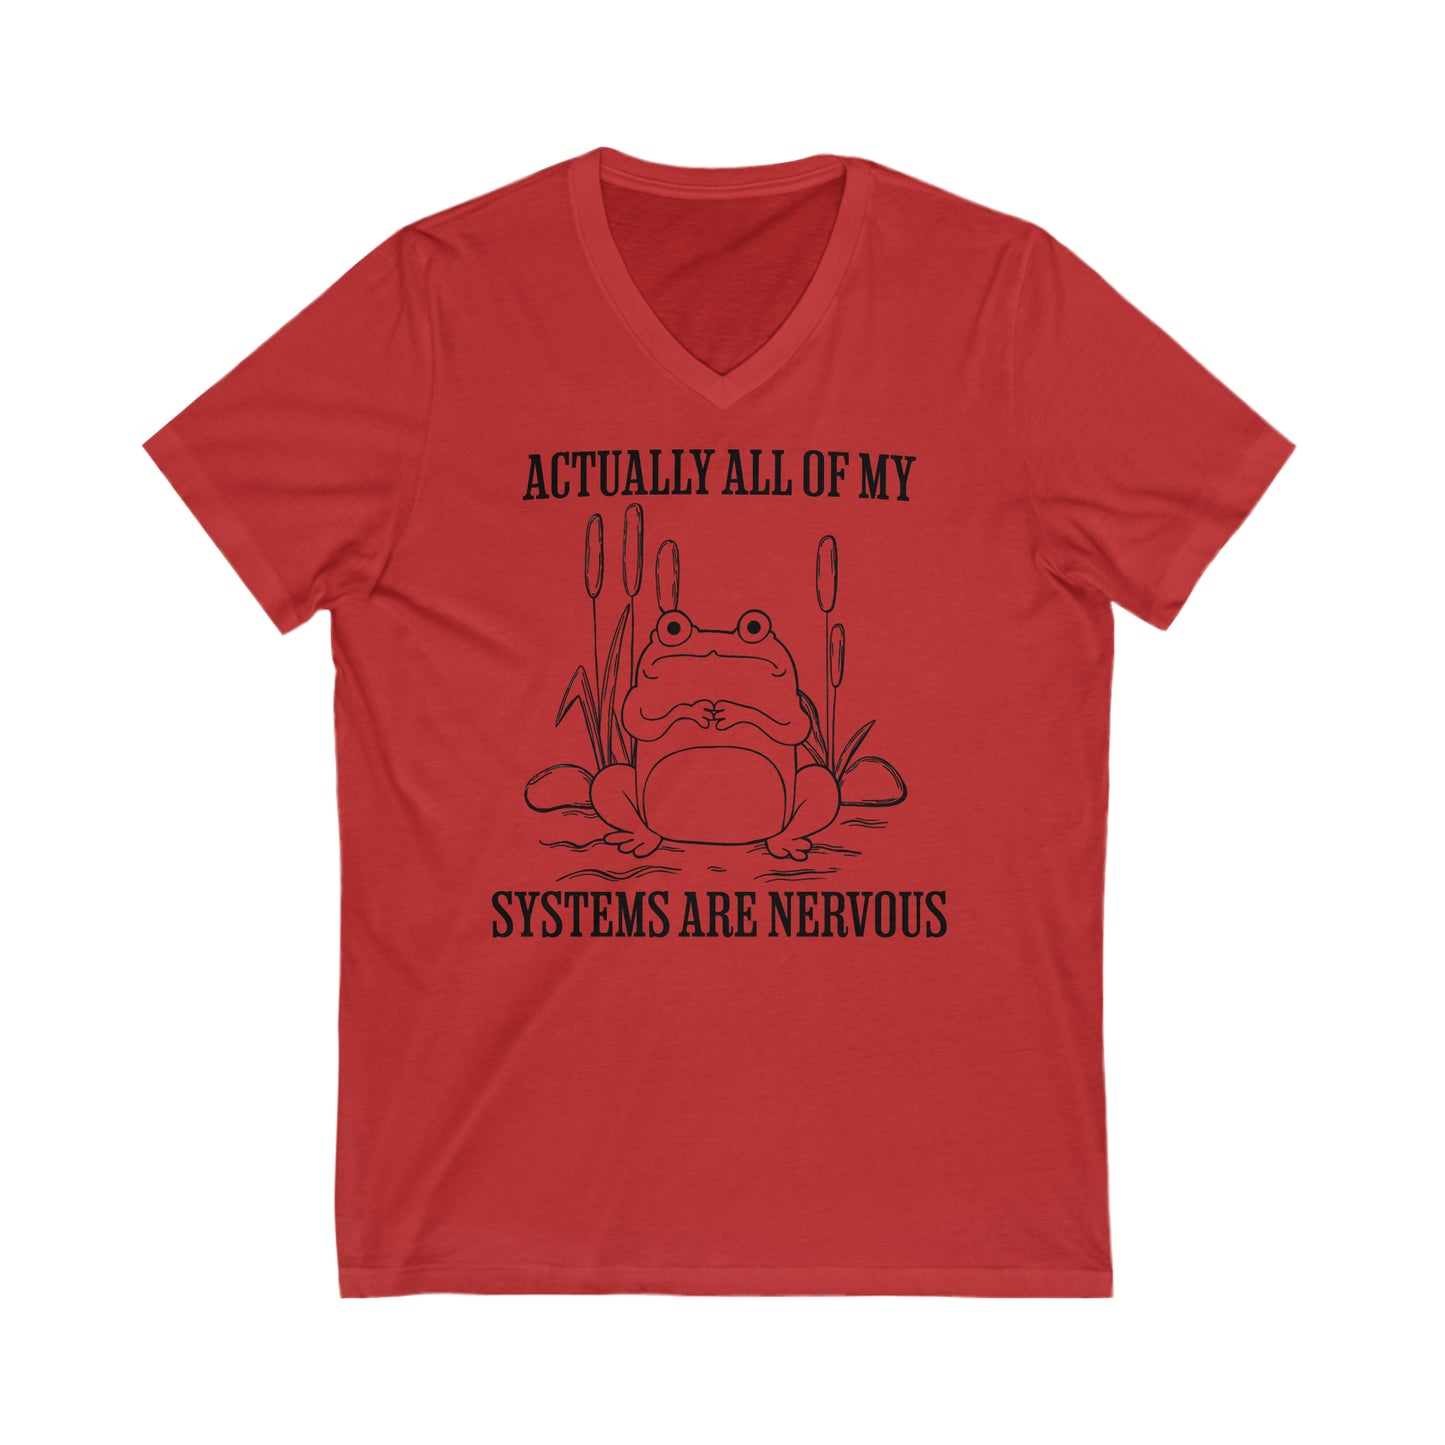 Actually, All of my Systems are Nervous - Unisex Jersey Short Sleeve V-Neck Tee